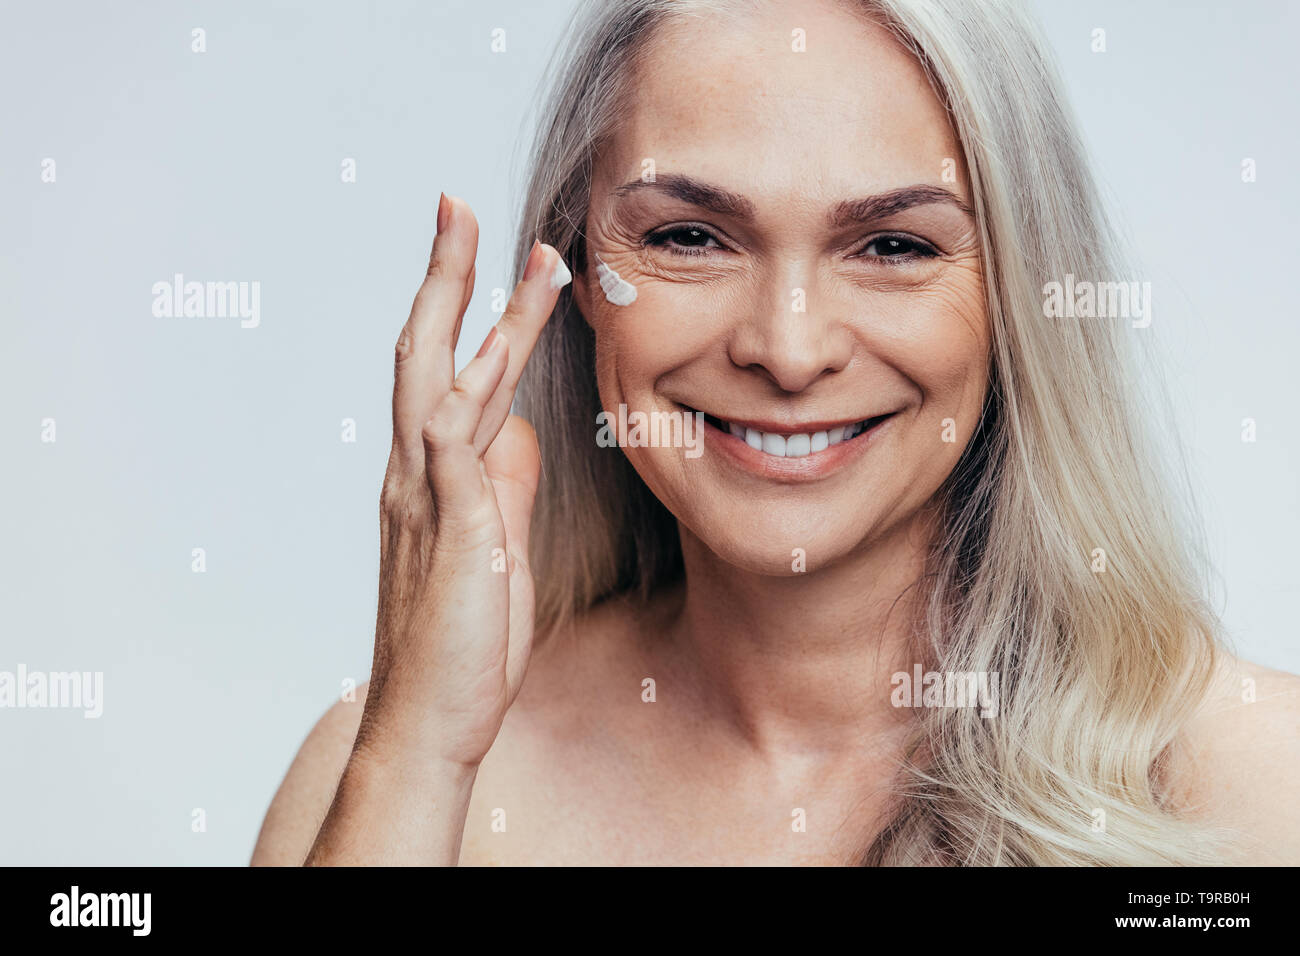 Smiling mid adult caucasian woman applying anti aging cream on her face. Senior female woman applying moisturizer on her face against grey background. Stock Photo